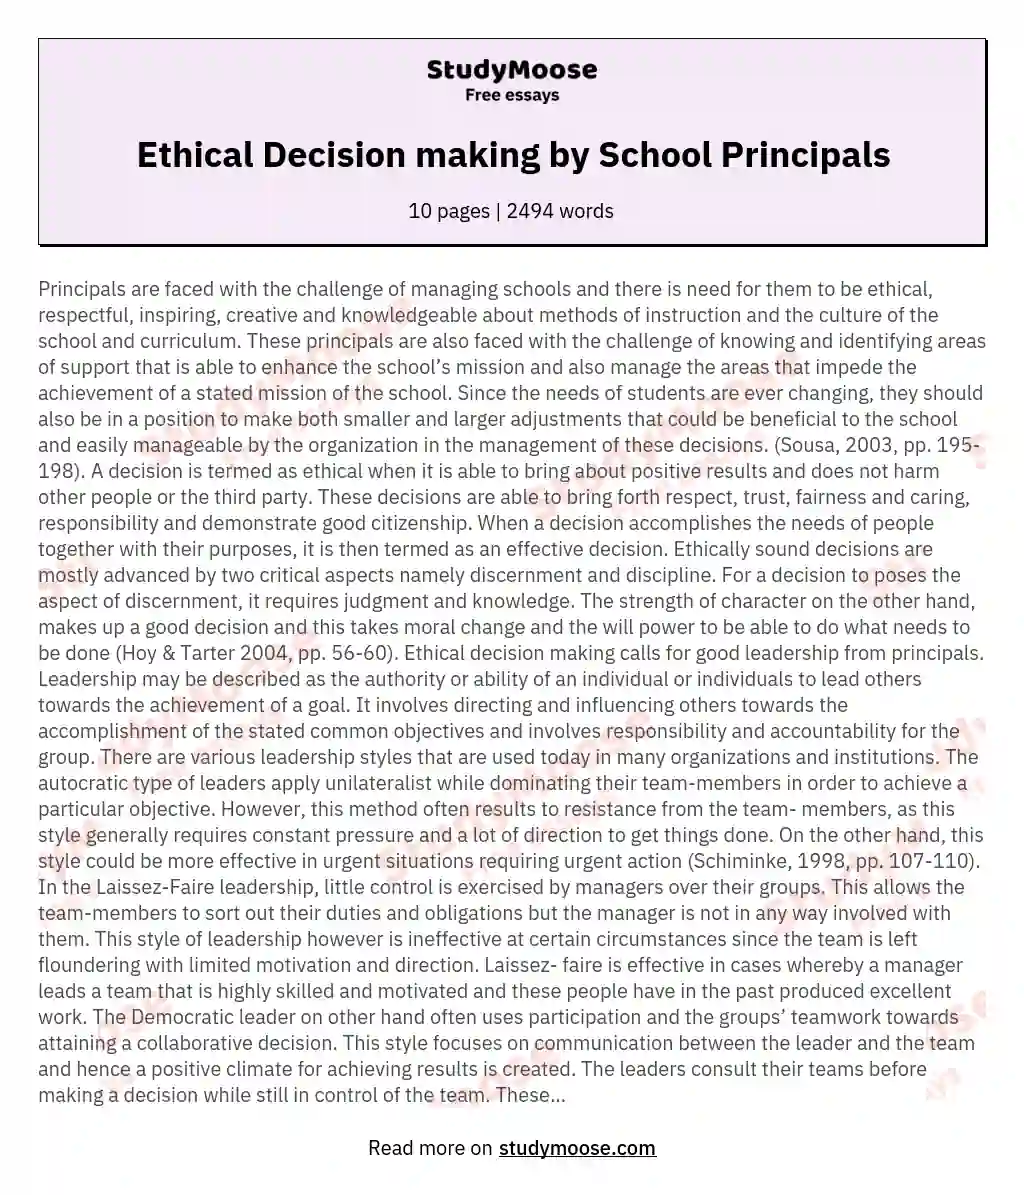 Ethical Decision making by School Principals